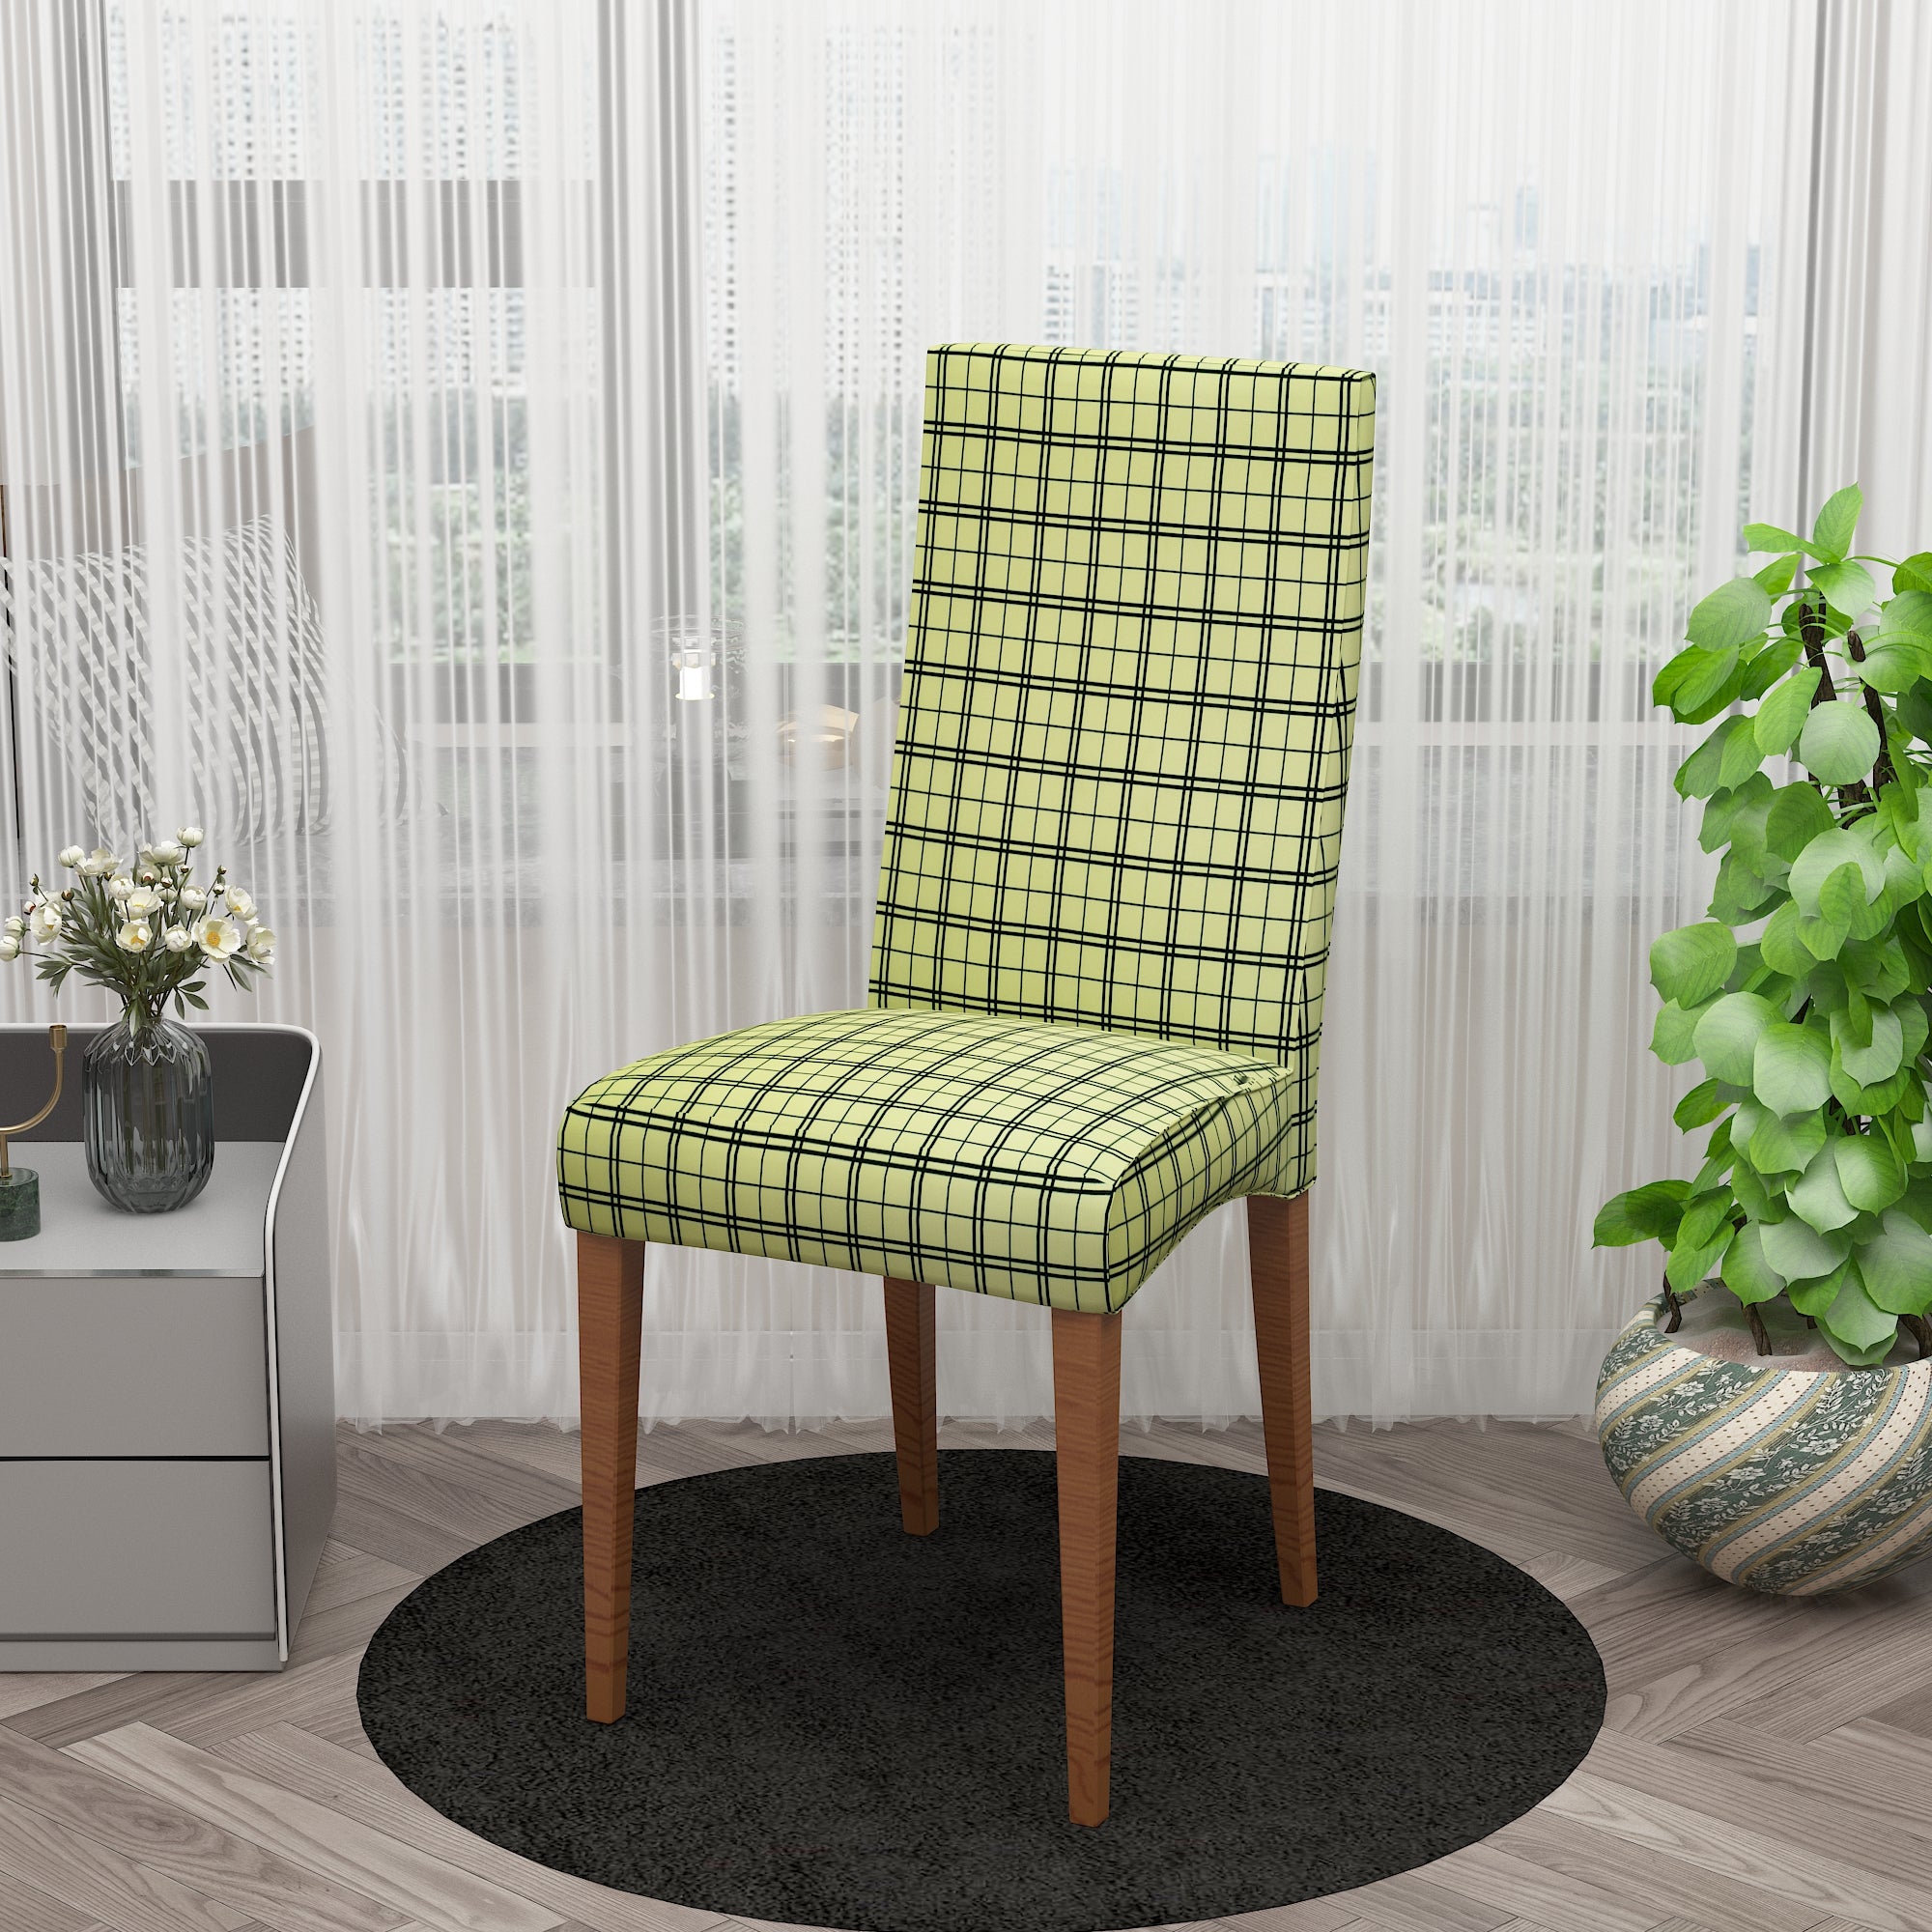 Polyester Spandex Stretchable Printed Chair Cover, MG15